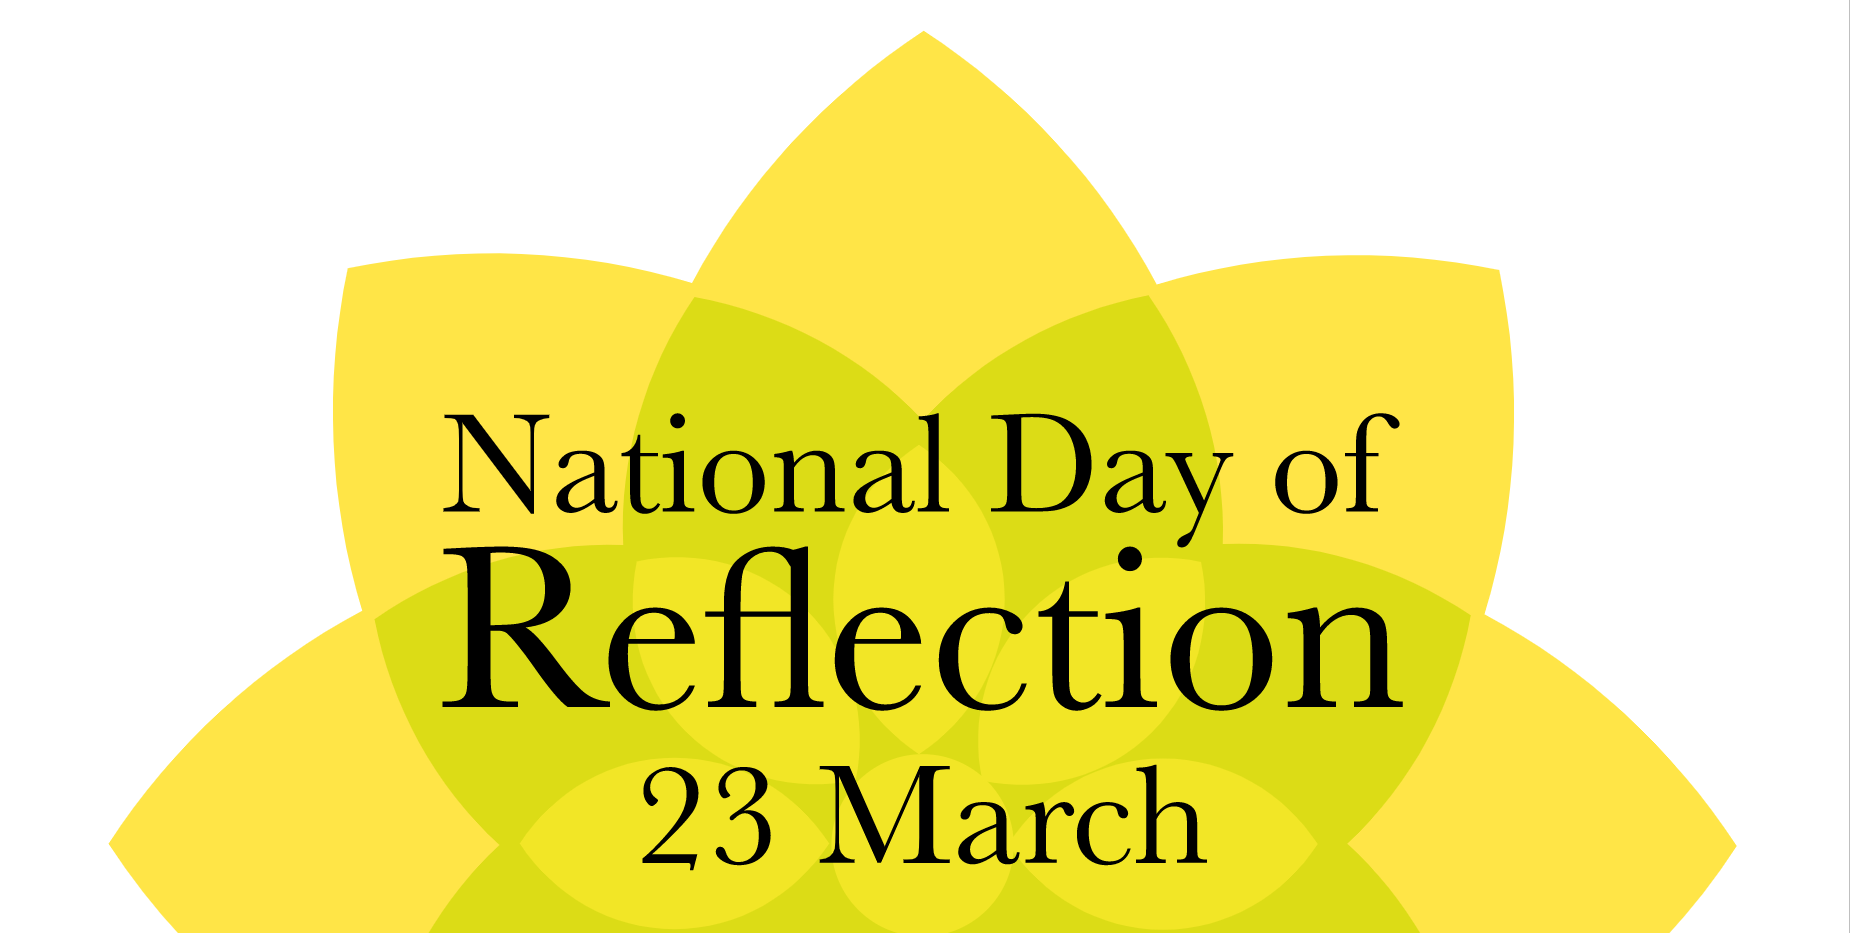 A graphic displaying the words "National Day of Reflection 23 March" overlaid onto a stylised daffodil graphic